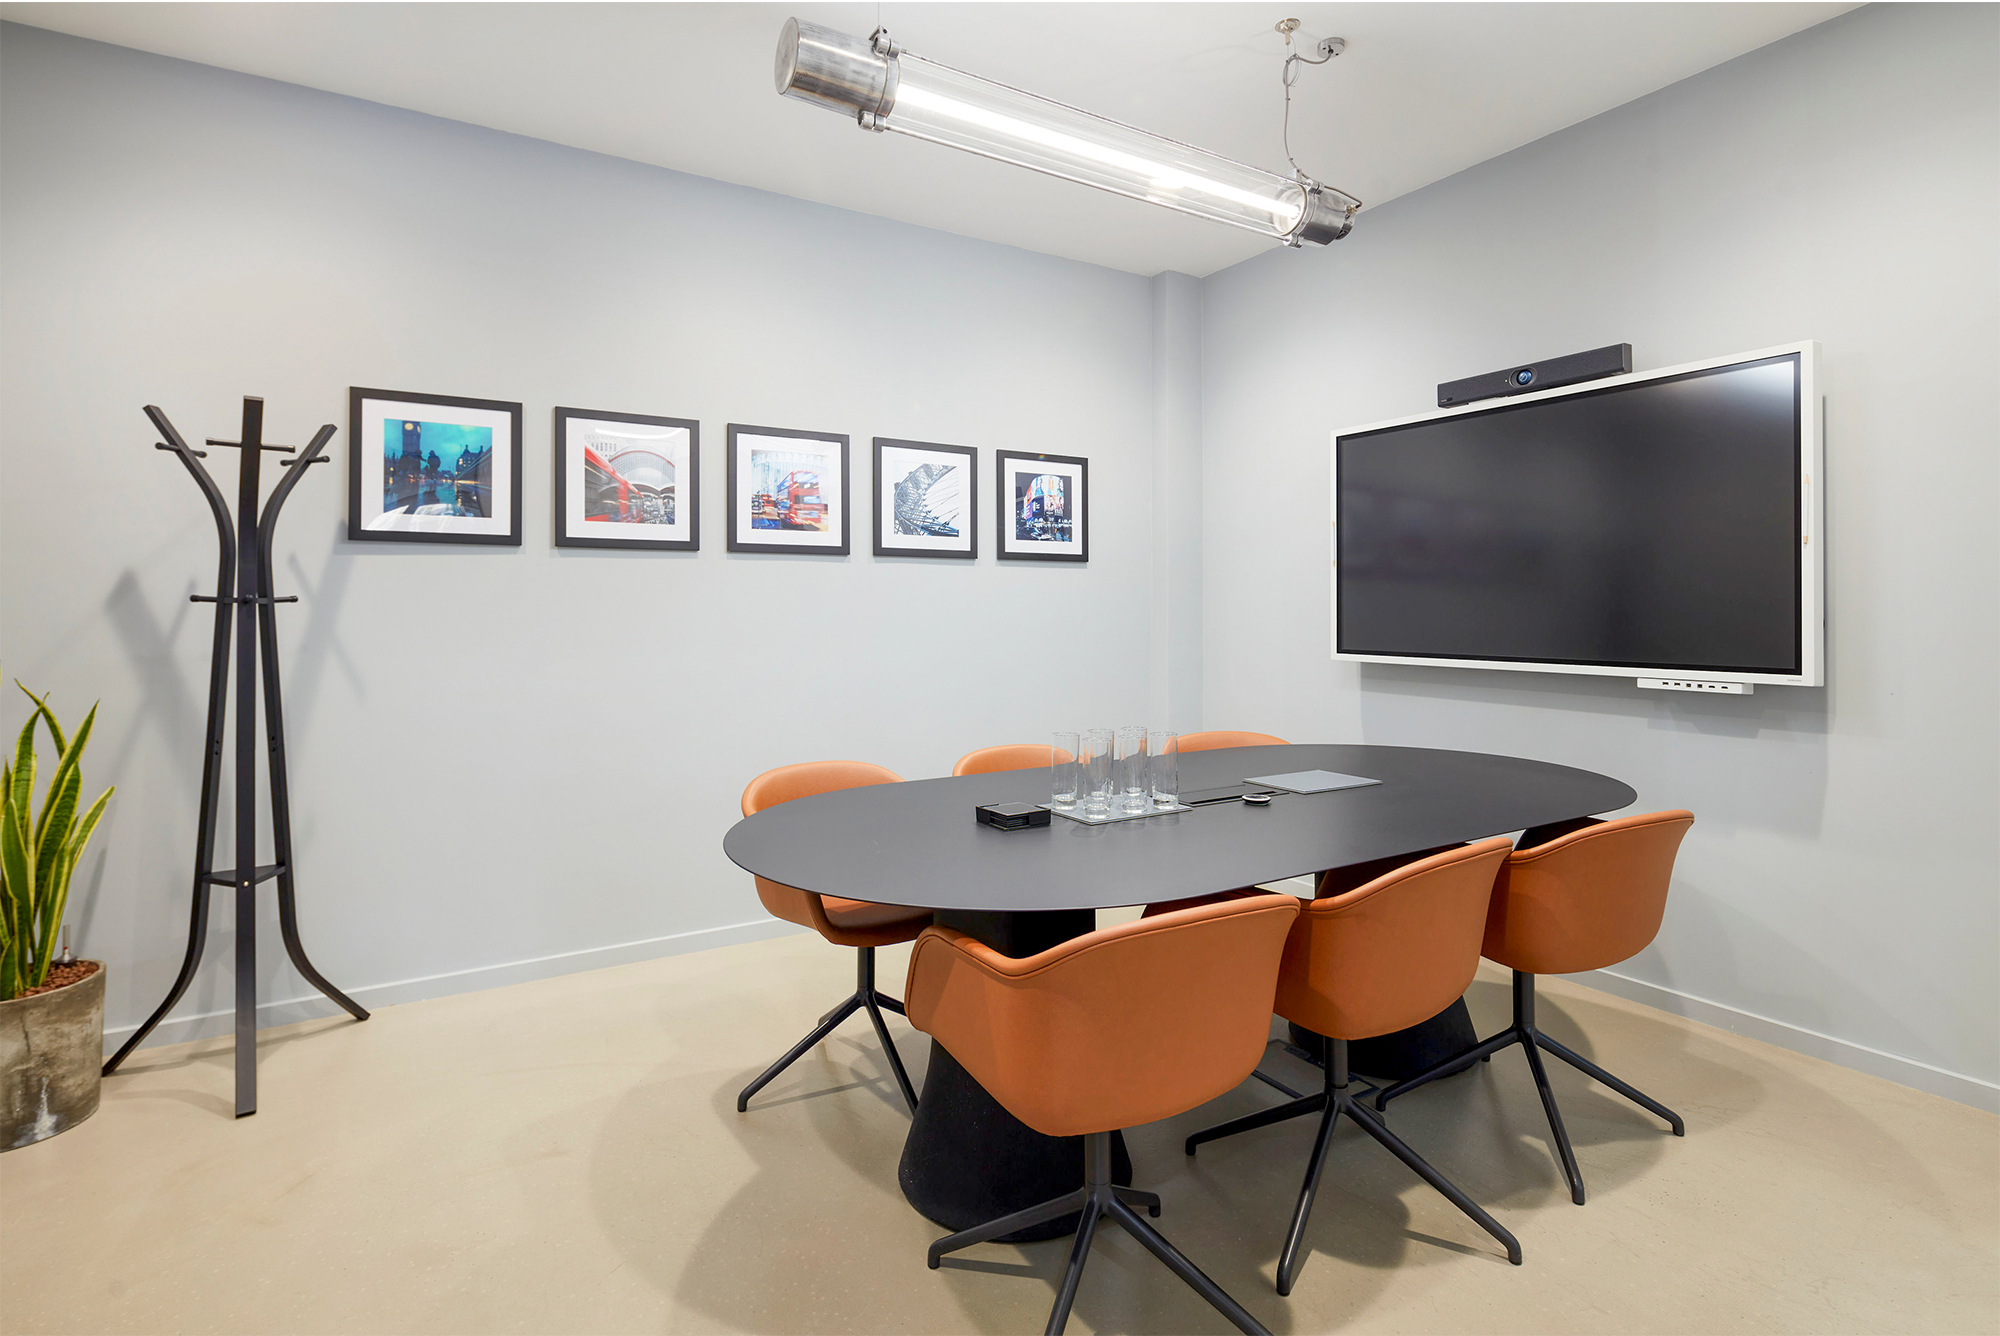 Meeting room with black table and 6 brown leather chairs. Large display screen and framed photographs on walls.